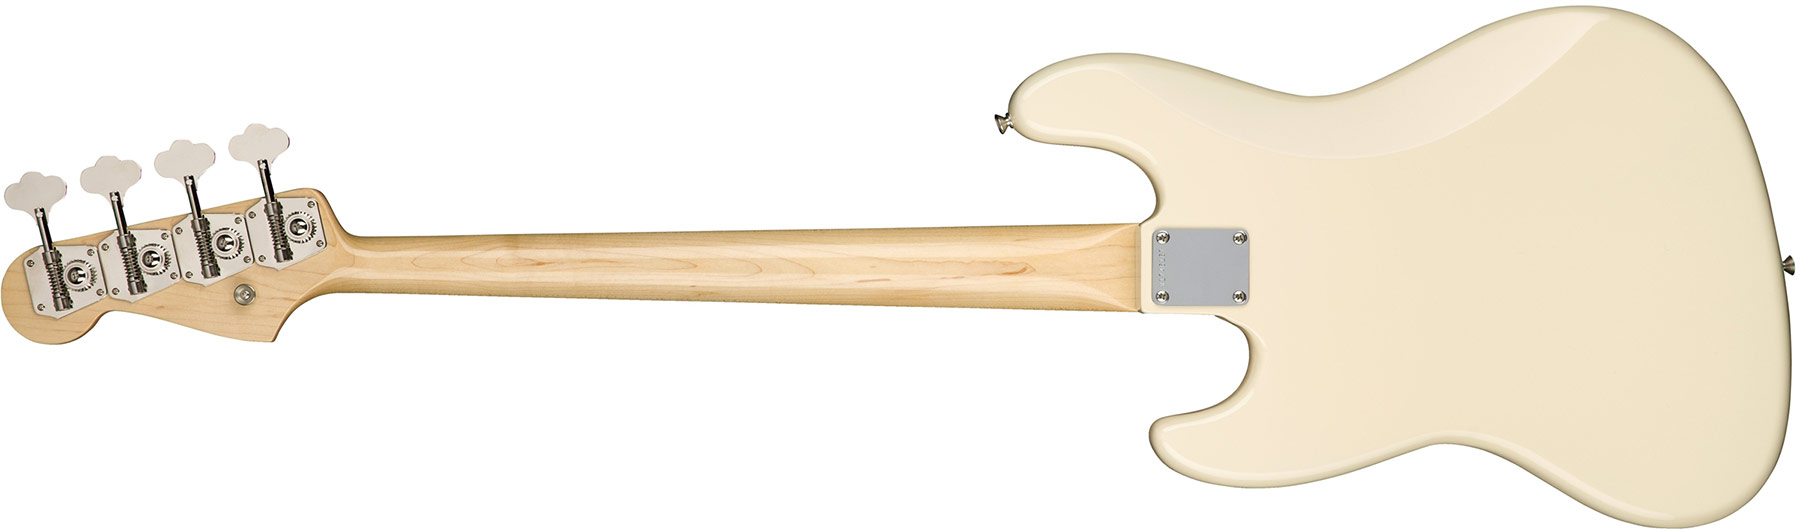 Fender Jazz Bass '60s American Original Usa Rw - Olympic White - Basse Électrique Solid Body - Variation 2